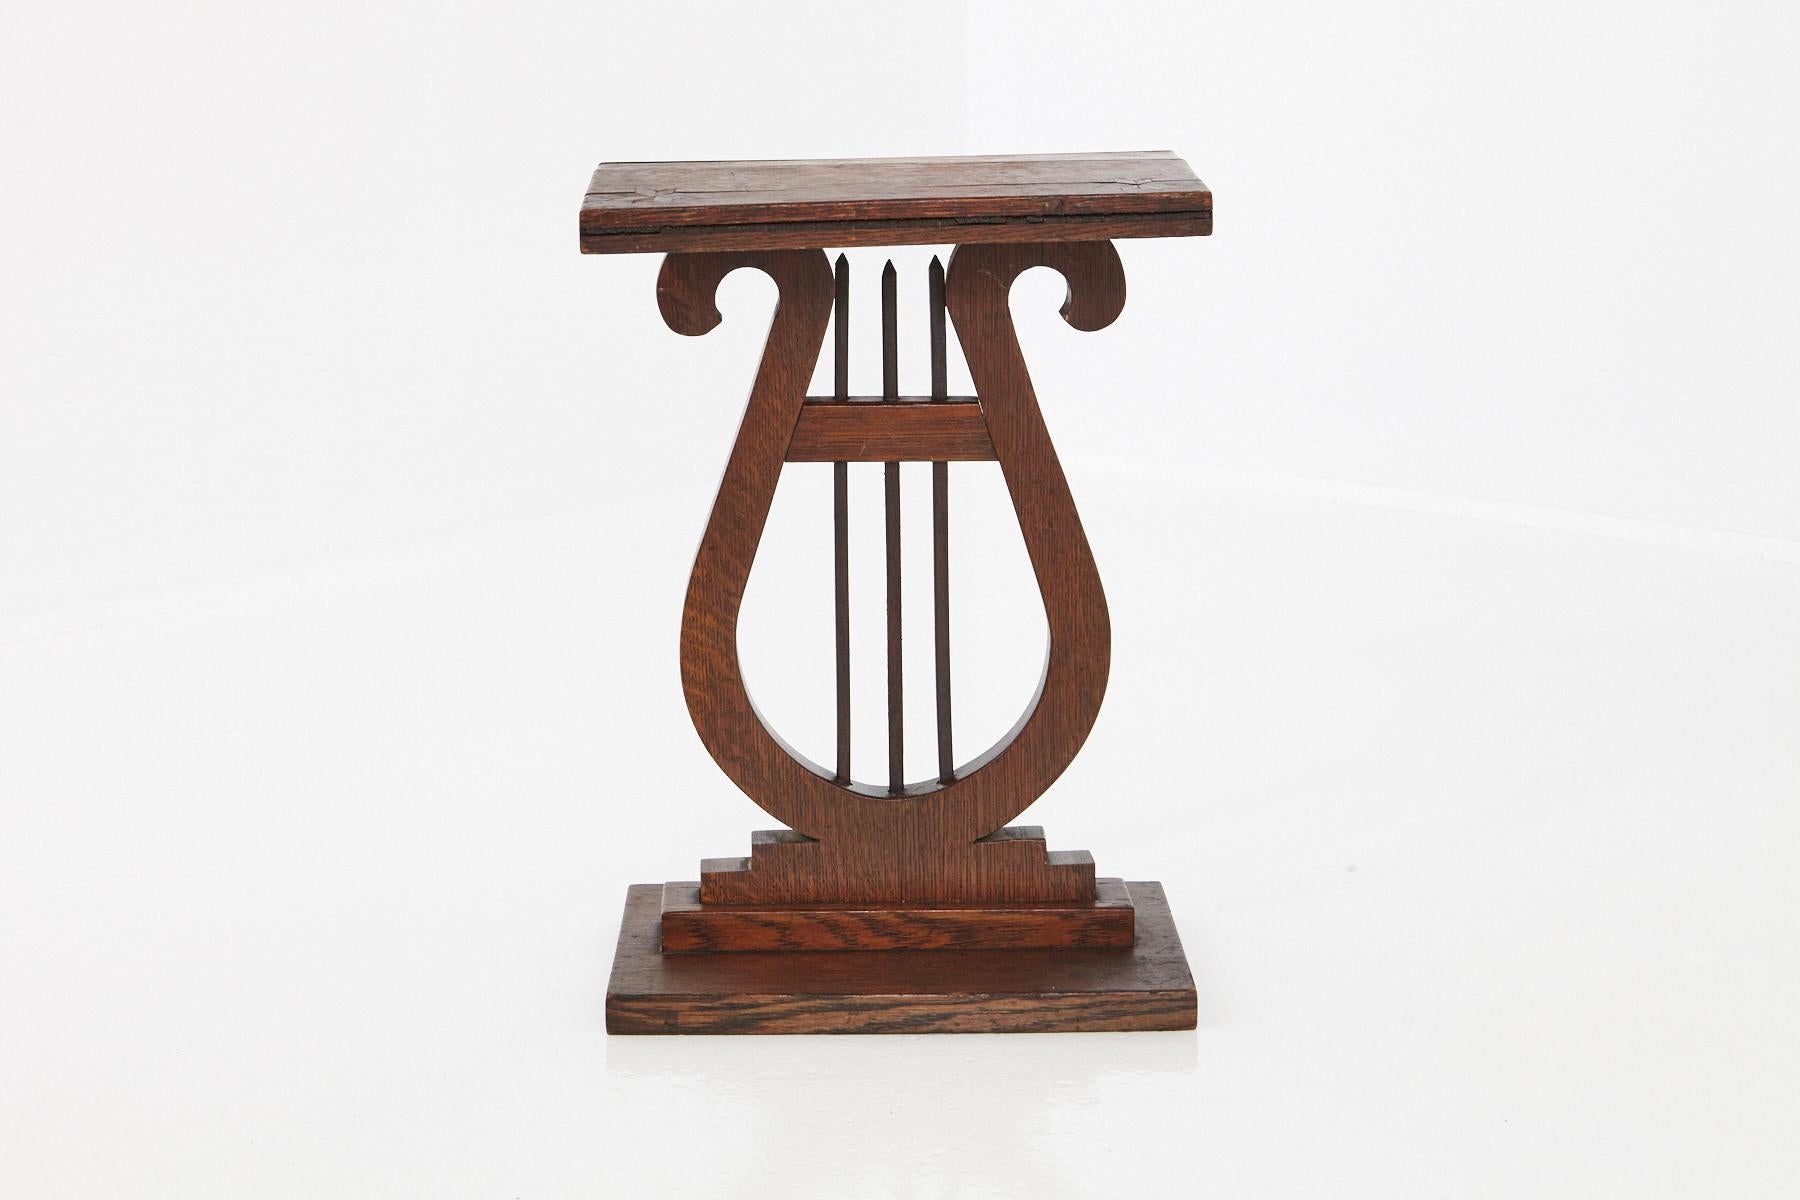 Late 19th century French harp or lyre style small side table, with carved starburst inlay at the corners of the top, circa 1880s. The top is warped, please refer to the photos.
The table has a very Wabi-Sabi style charm and patina.